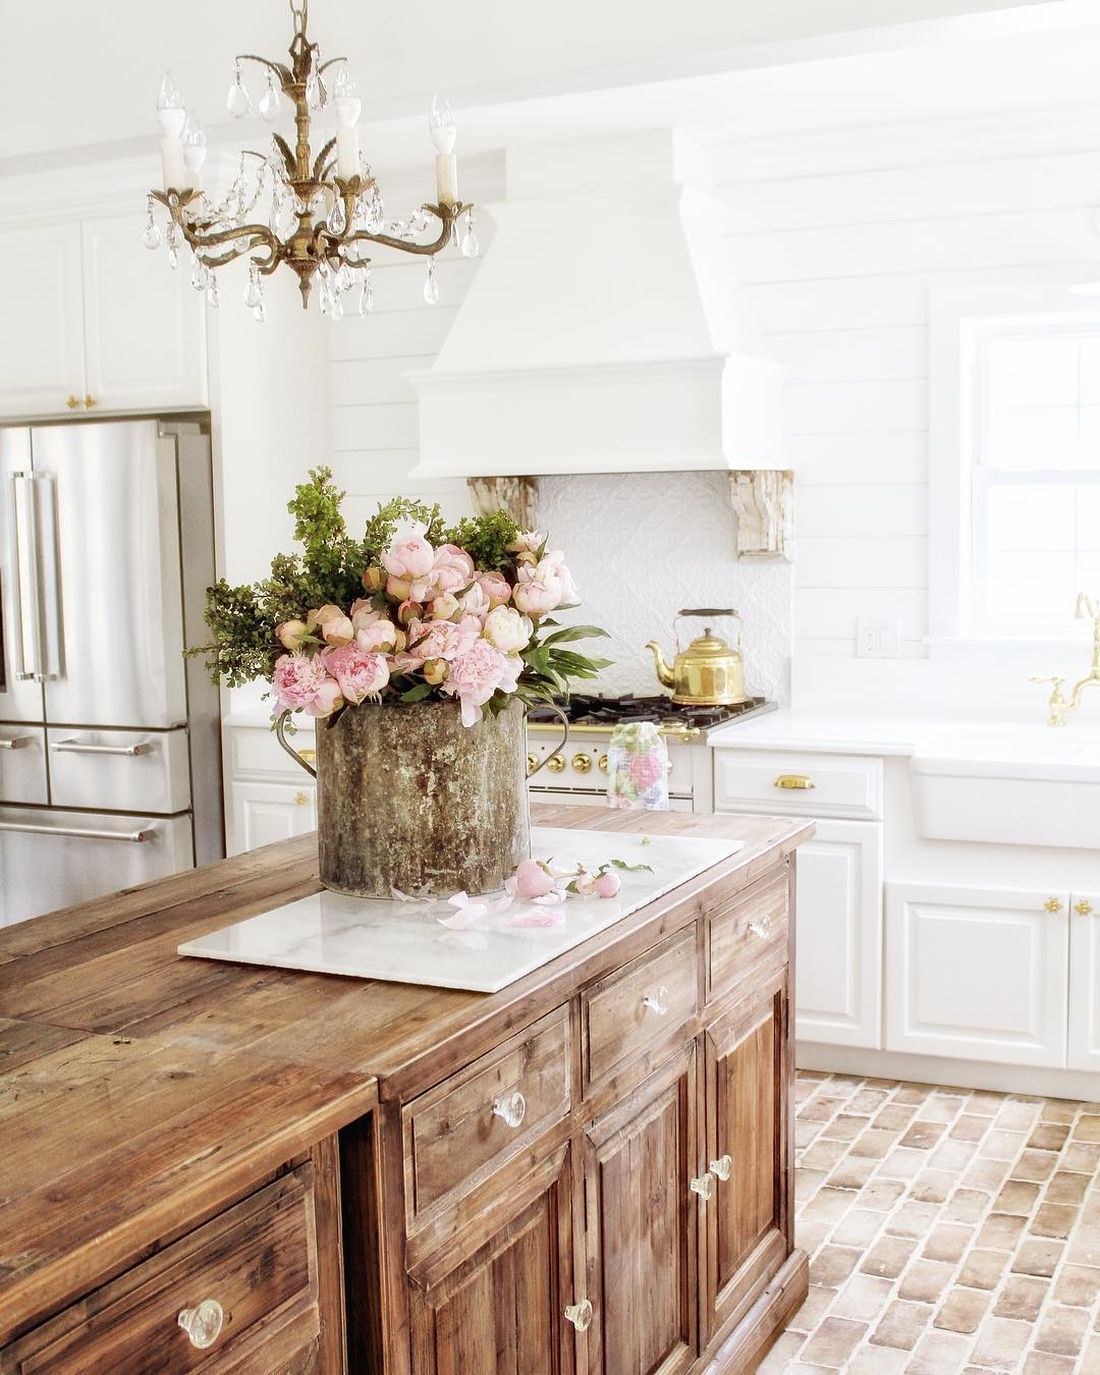 French Country Kitchen with Wooden Island via @simplyfrenchmarket